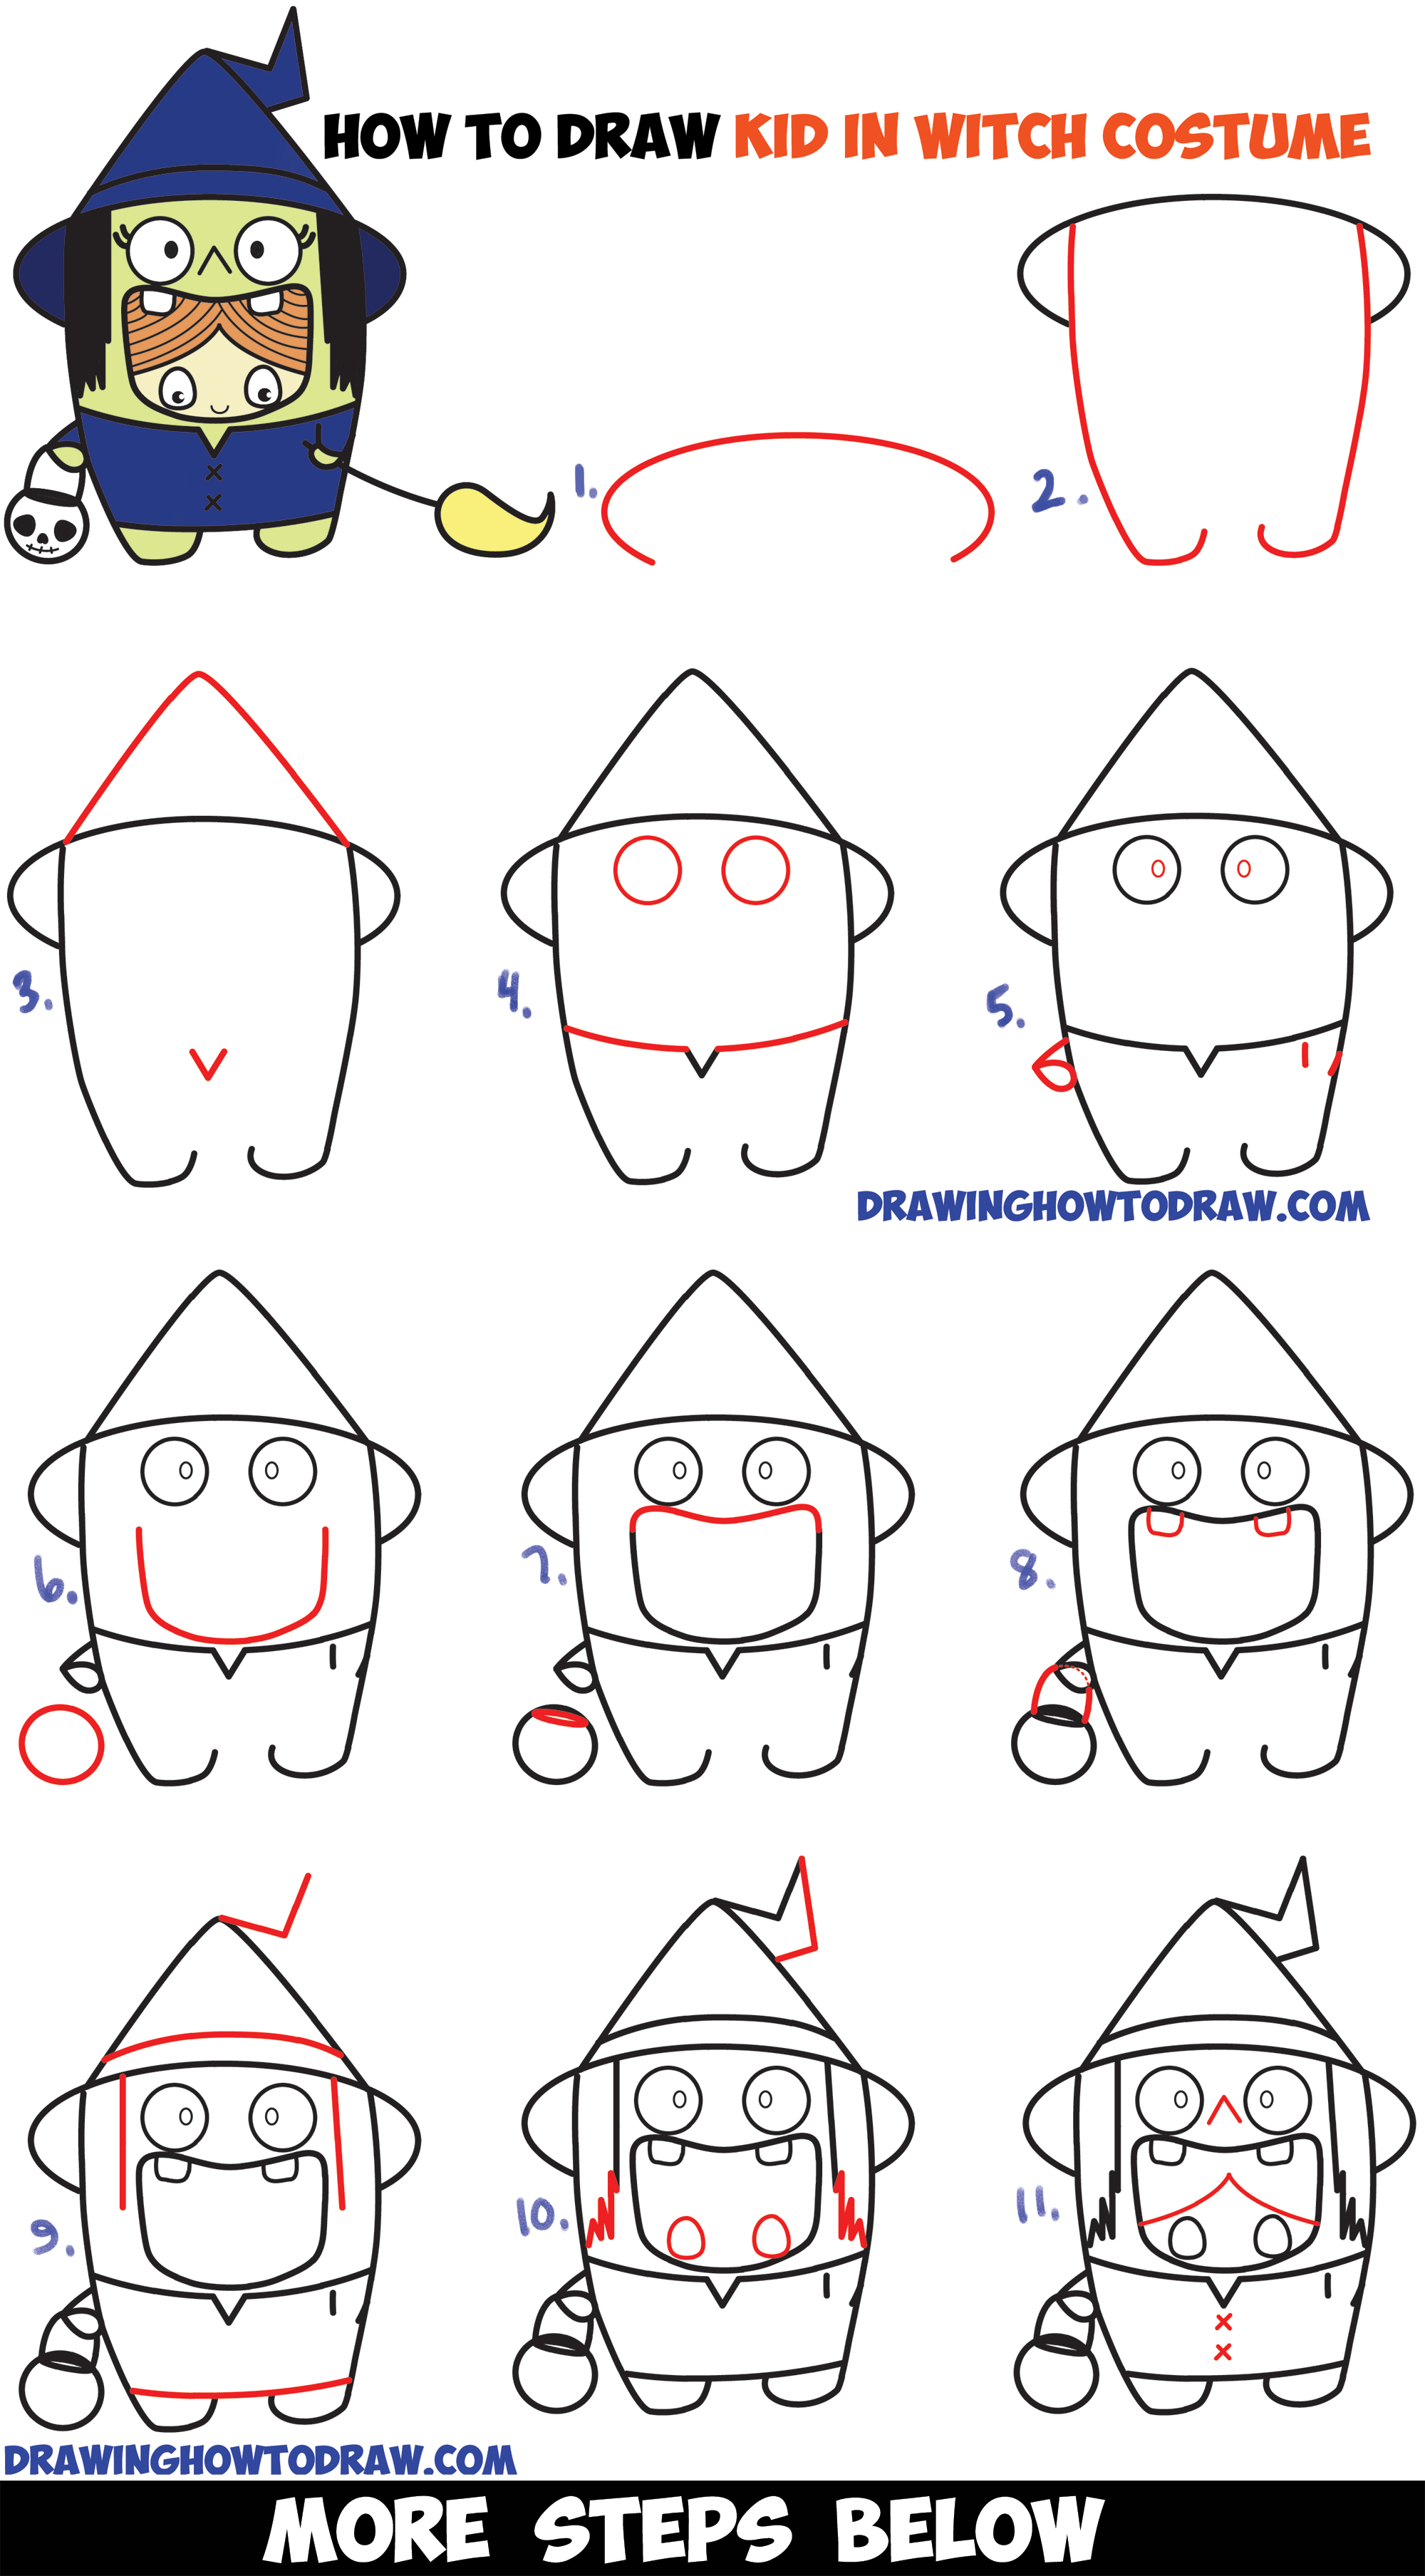 How to Draw a Kid in a Halloween Witch Costume (Cute Kawaii) Easy Step